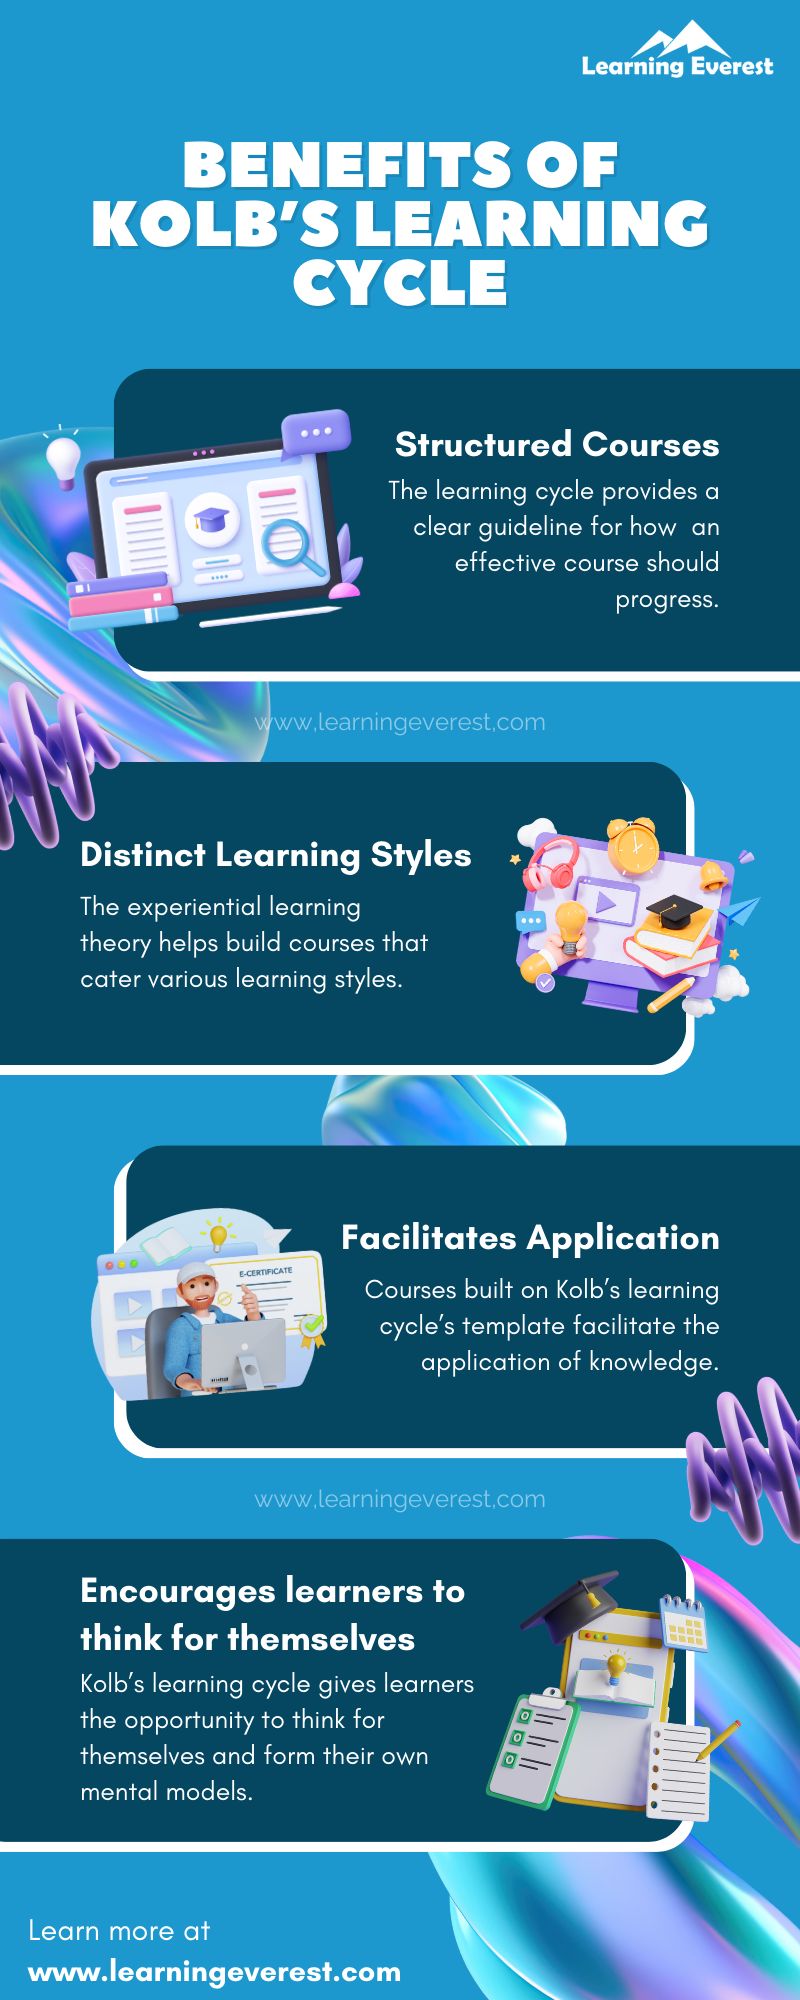 Benefits of Kolb’s Learning Cycle and Learning Styles